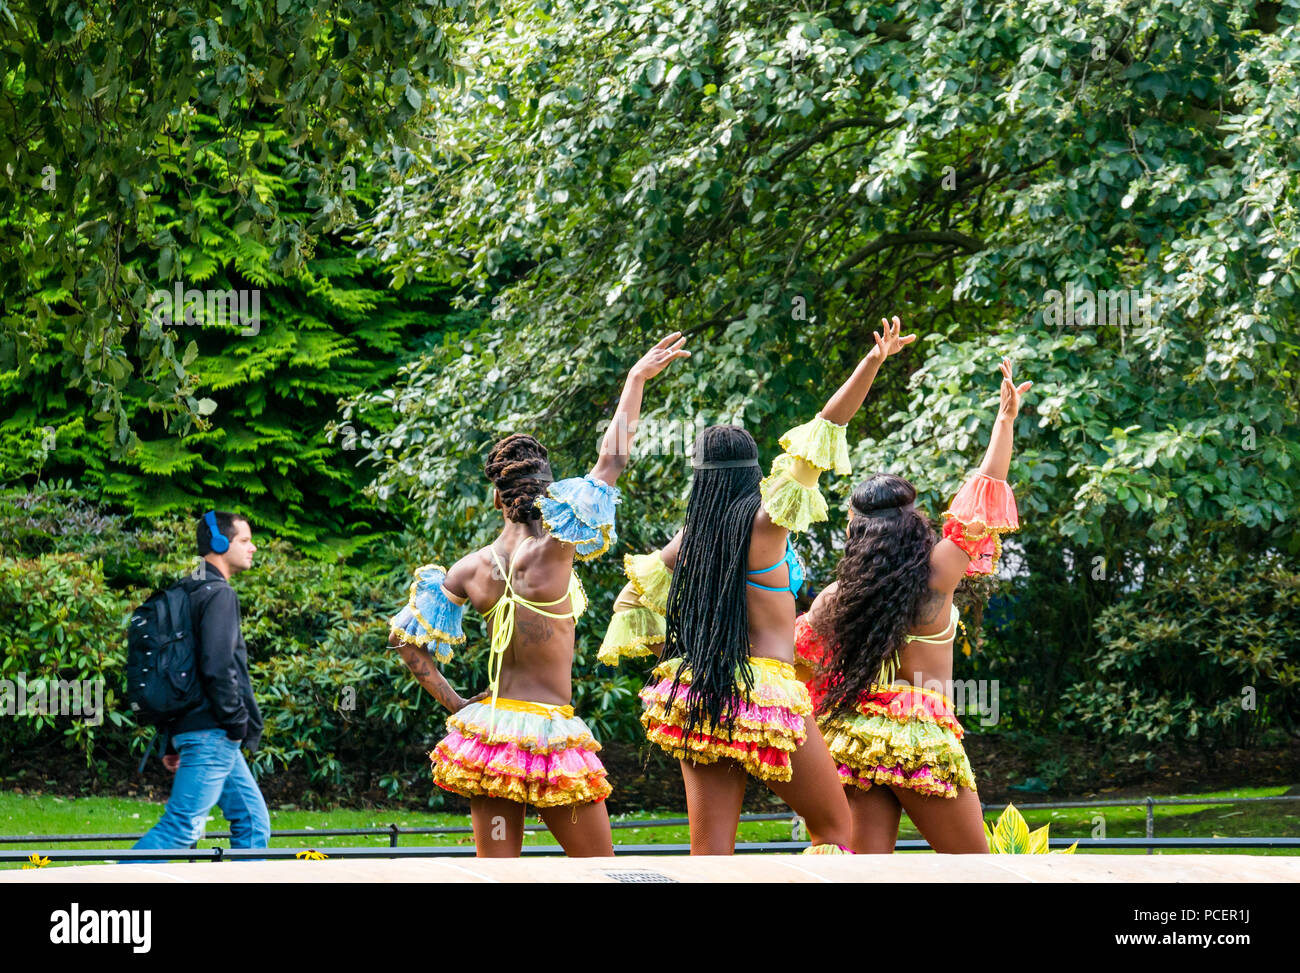 Photocall Caribbean Dynasty dancers of UniverSoul Circus, Princes Street Gardens, Edinburgh, Scotland, UK during Fringe Festival with man walking by Stock Photo